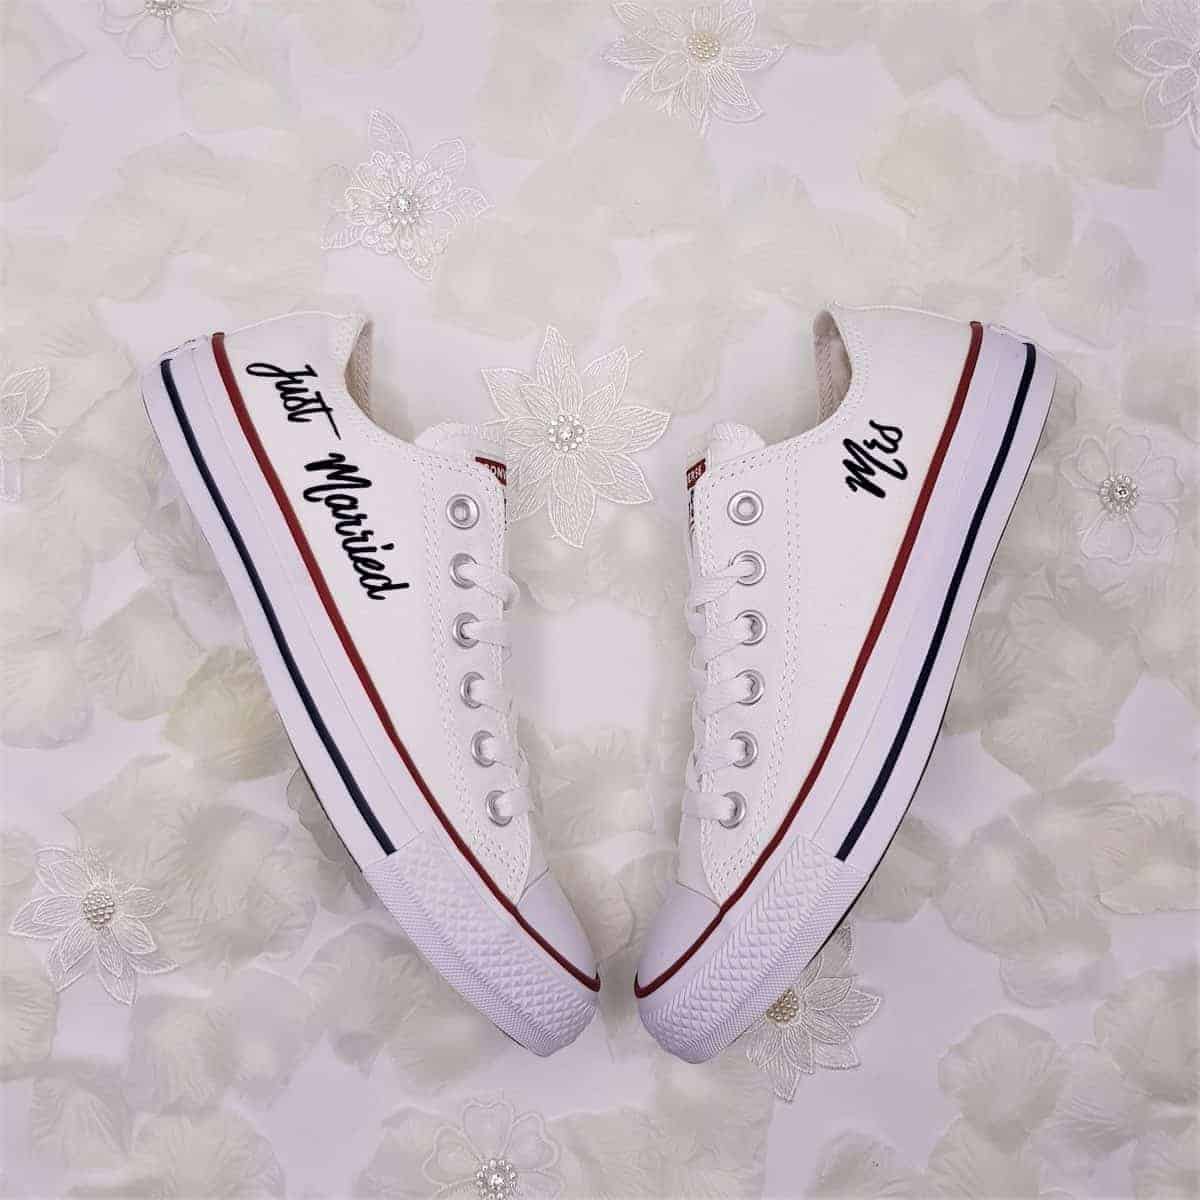 Couple Converse Married - Double G Customs